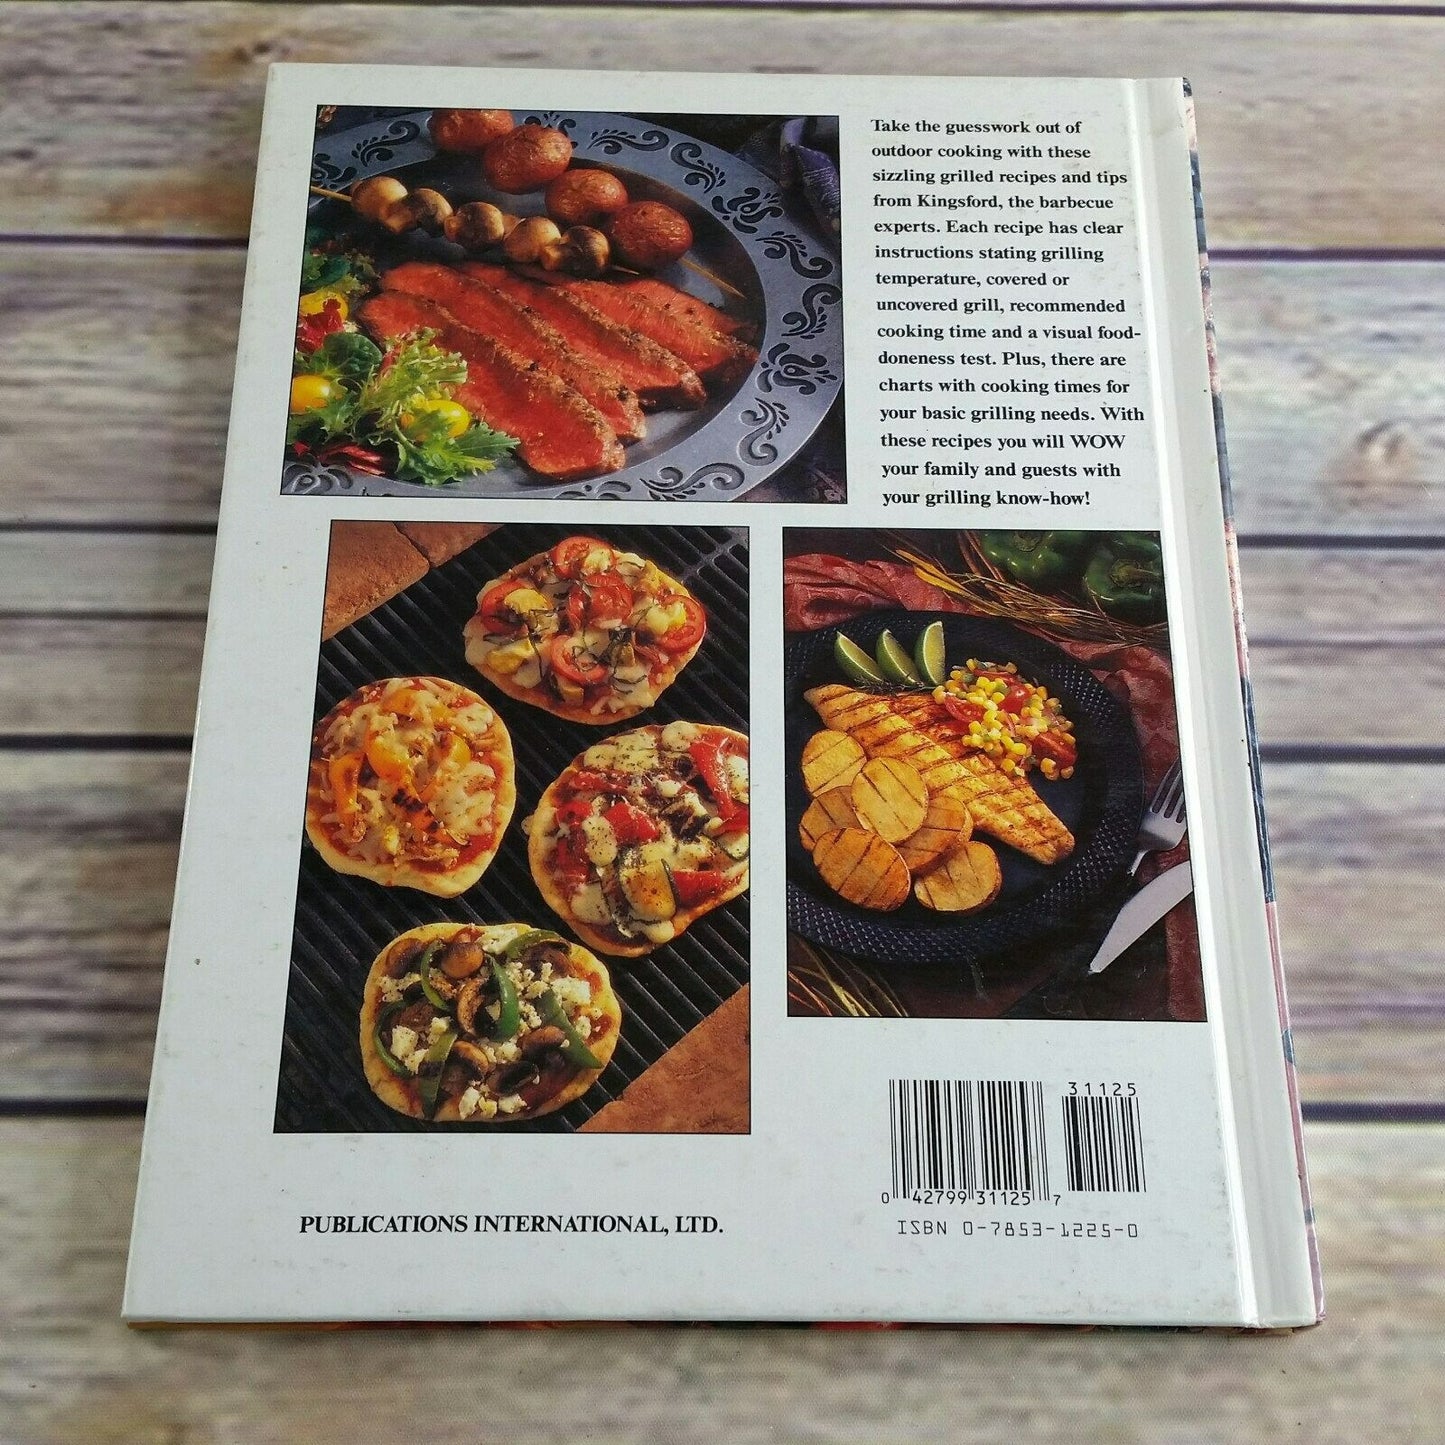 Vintage BBQ Cookbook Kingsford Barbecue Favorite Recipes 1995 Charcoal BBQ Recipes BBQing Food Basics Meats Poultry Seafood Smoked Sides